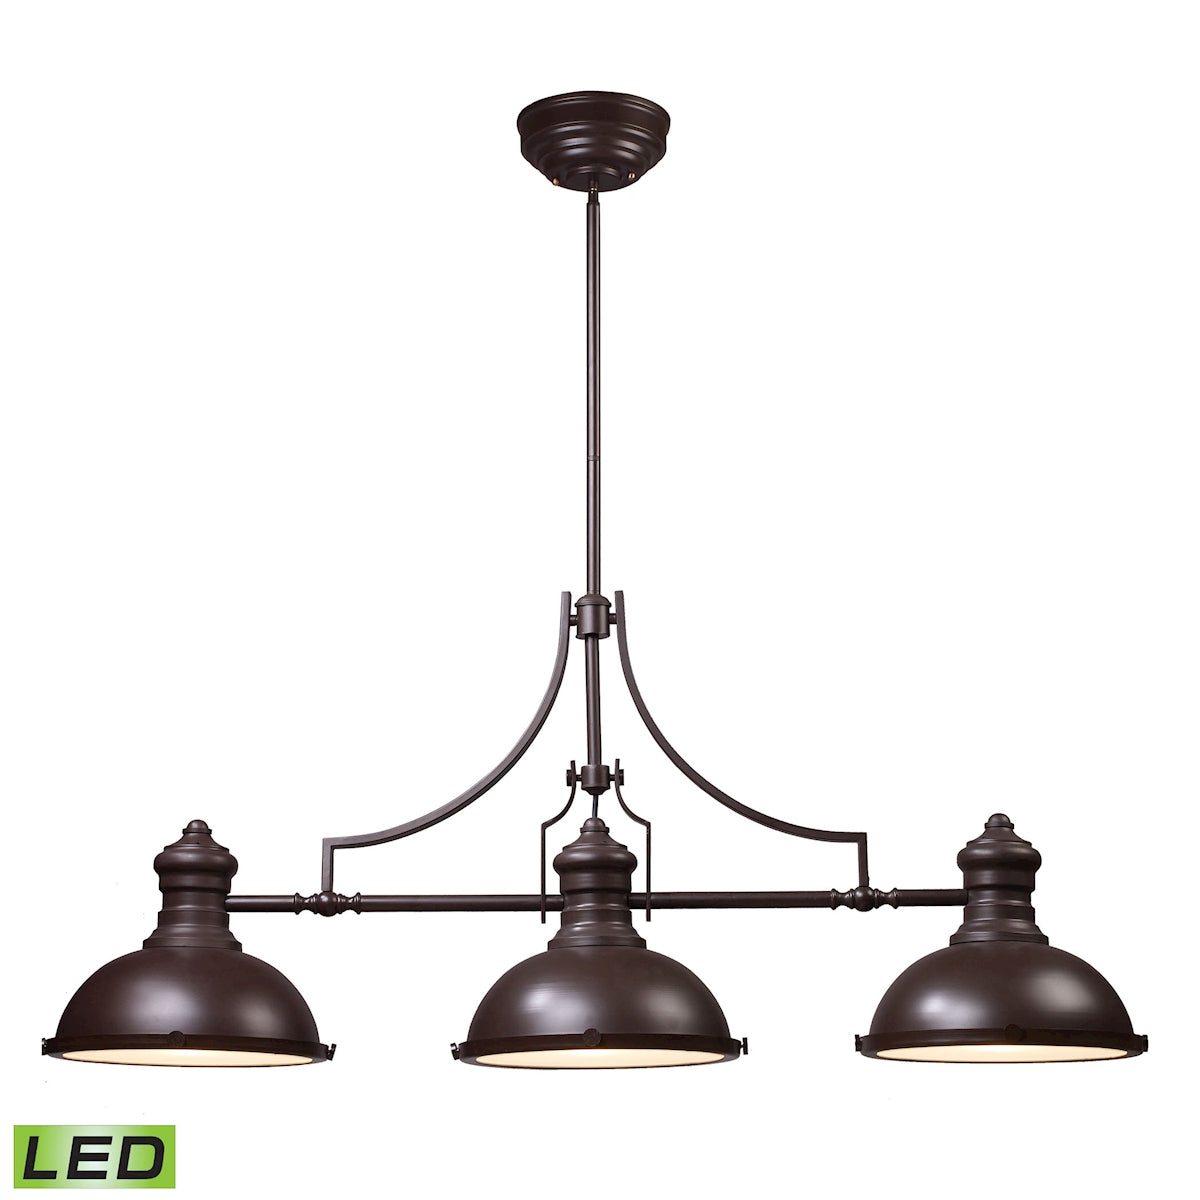 ELK Lighting 66135-3-LED Chadwick 3-Light Island Light in Oiled Bronze with Matching Shade - Includes LED Bulbs